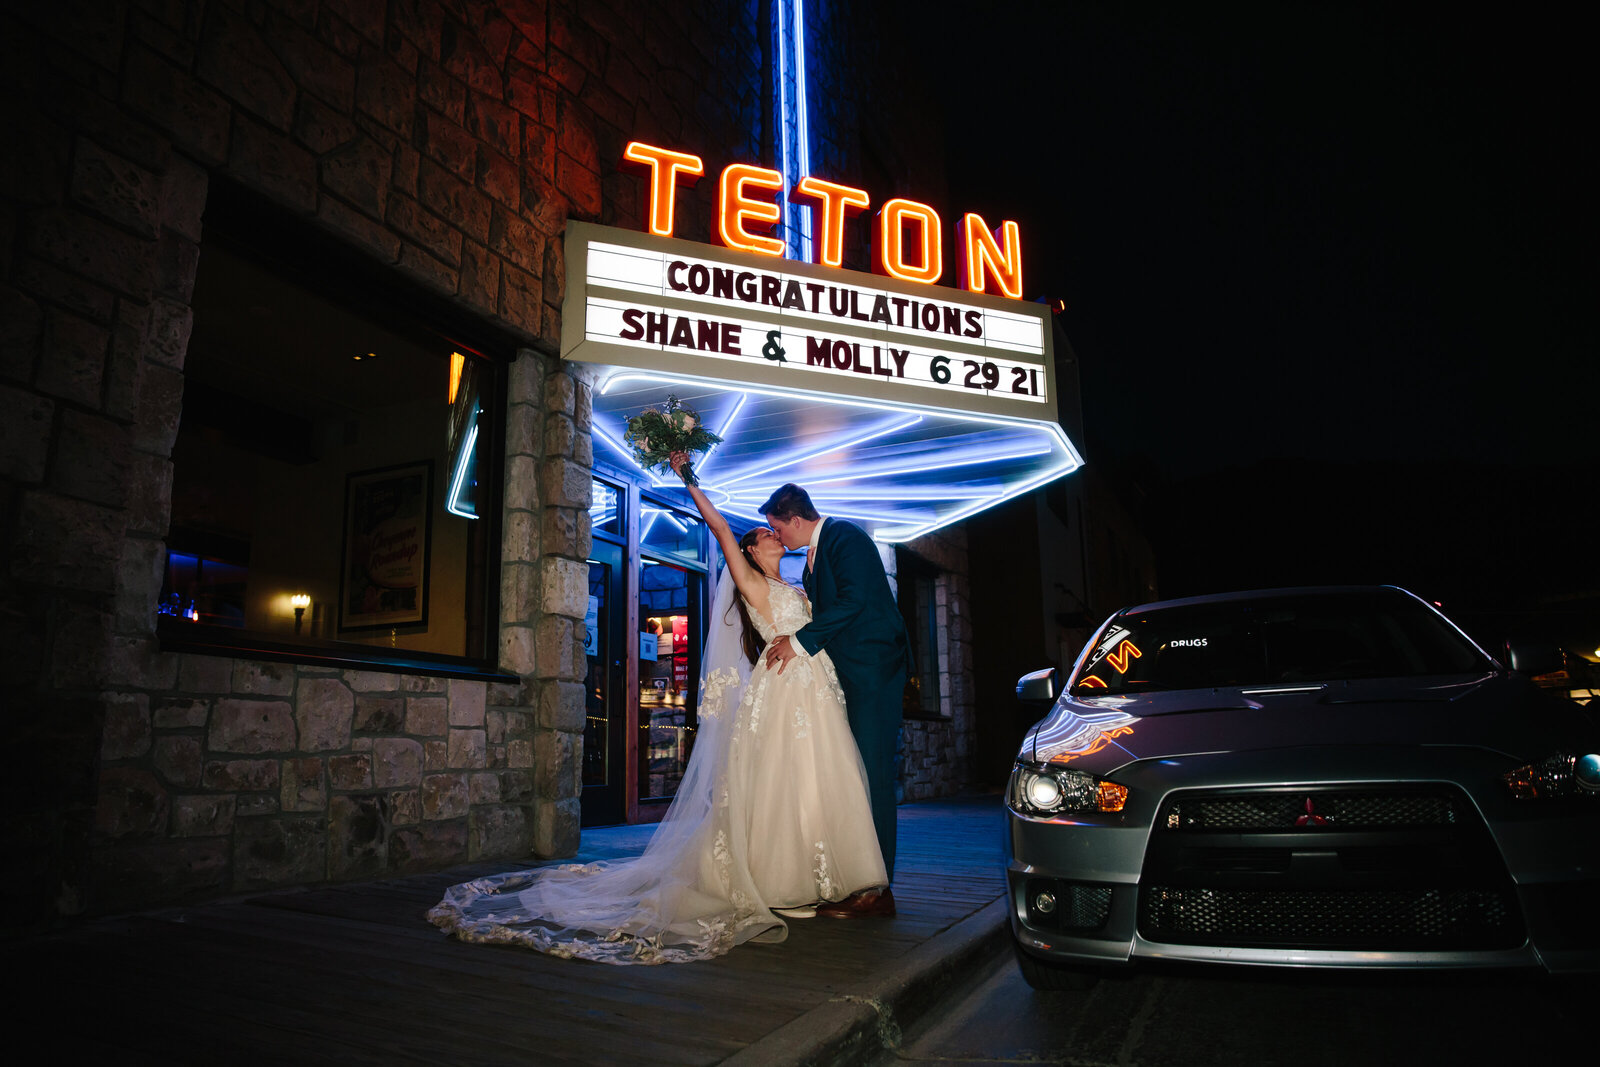 Jackson hole photographer captures bride and groom outside of Teton Pizza in Jackson Hole to celebrate their wedding